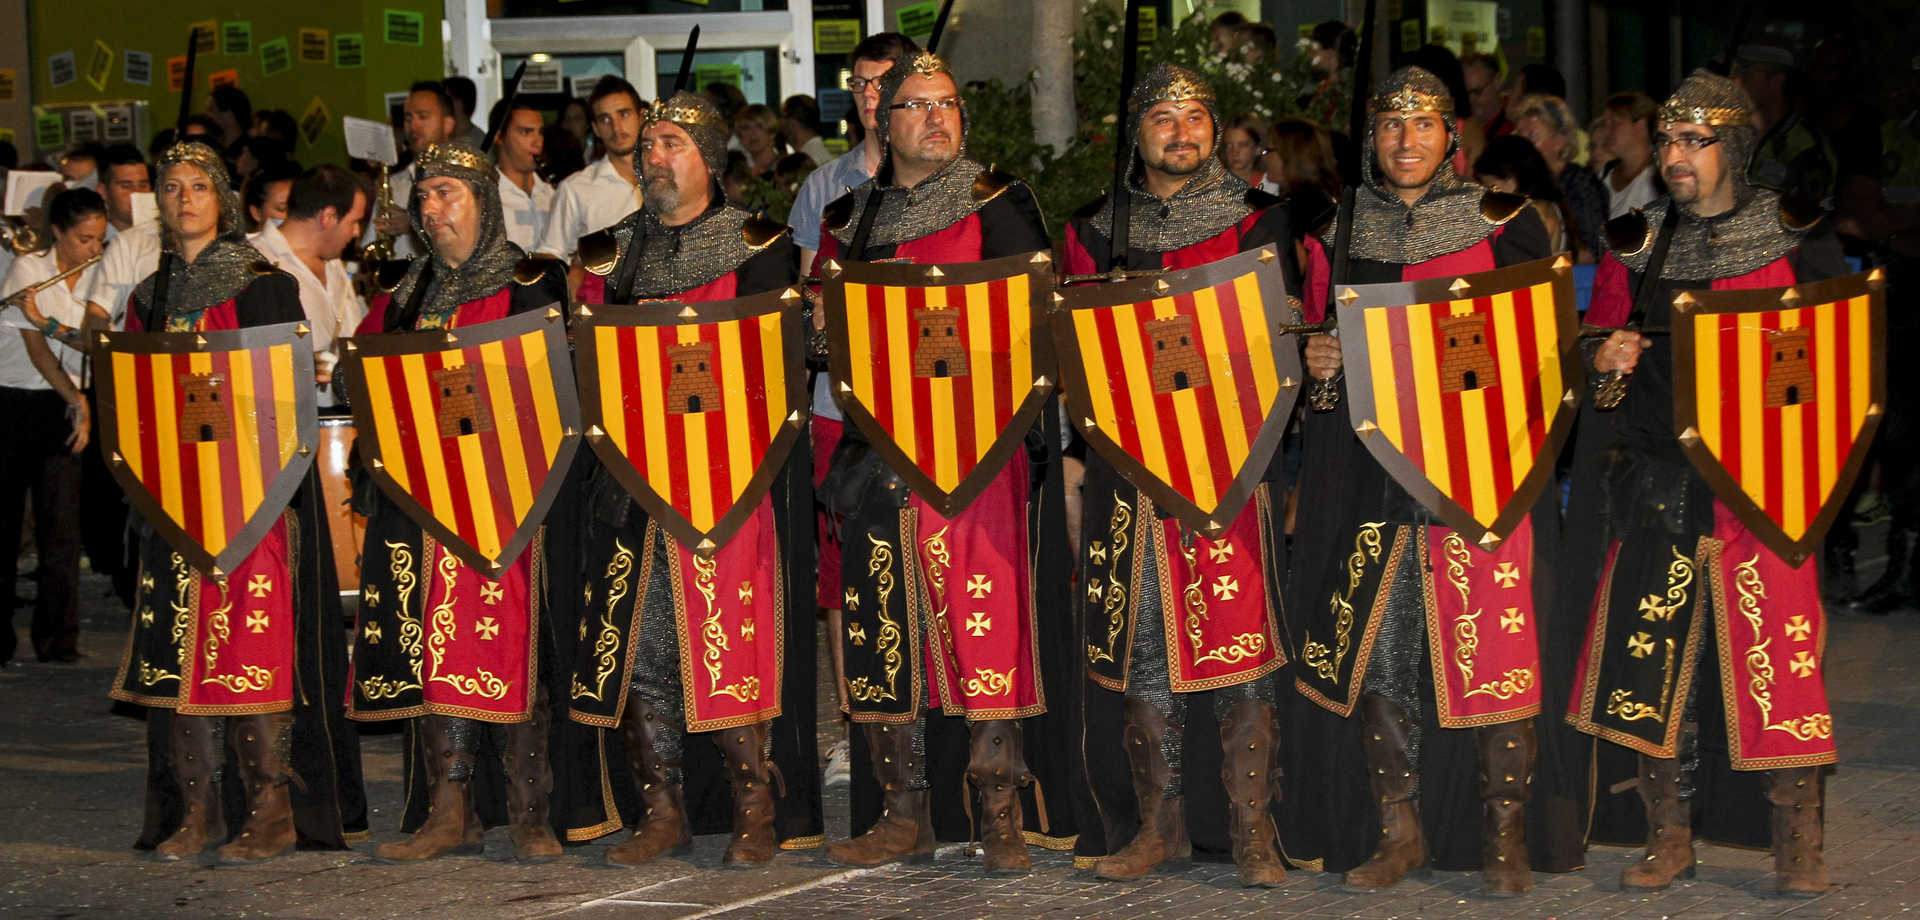 MOORS AND CHRISTIANS AND FESTIVITIES IN HONOUR OF VIRGEN DE LORETO